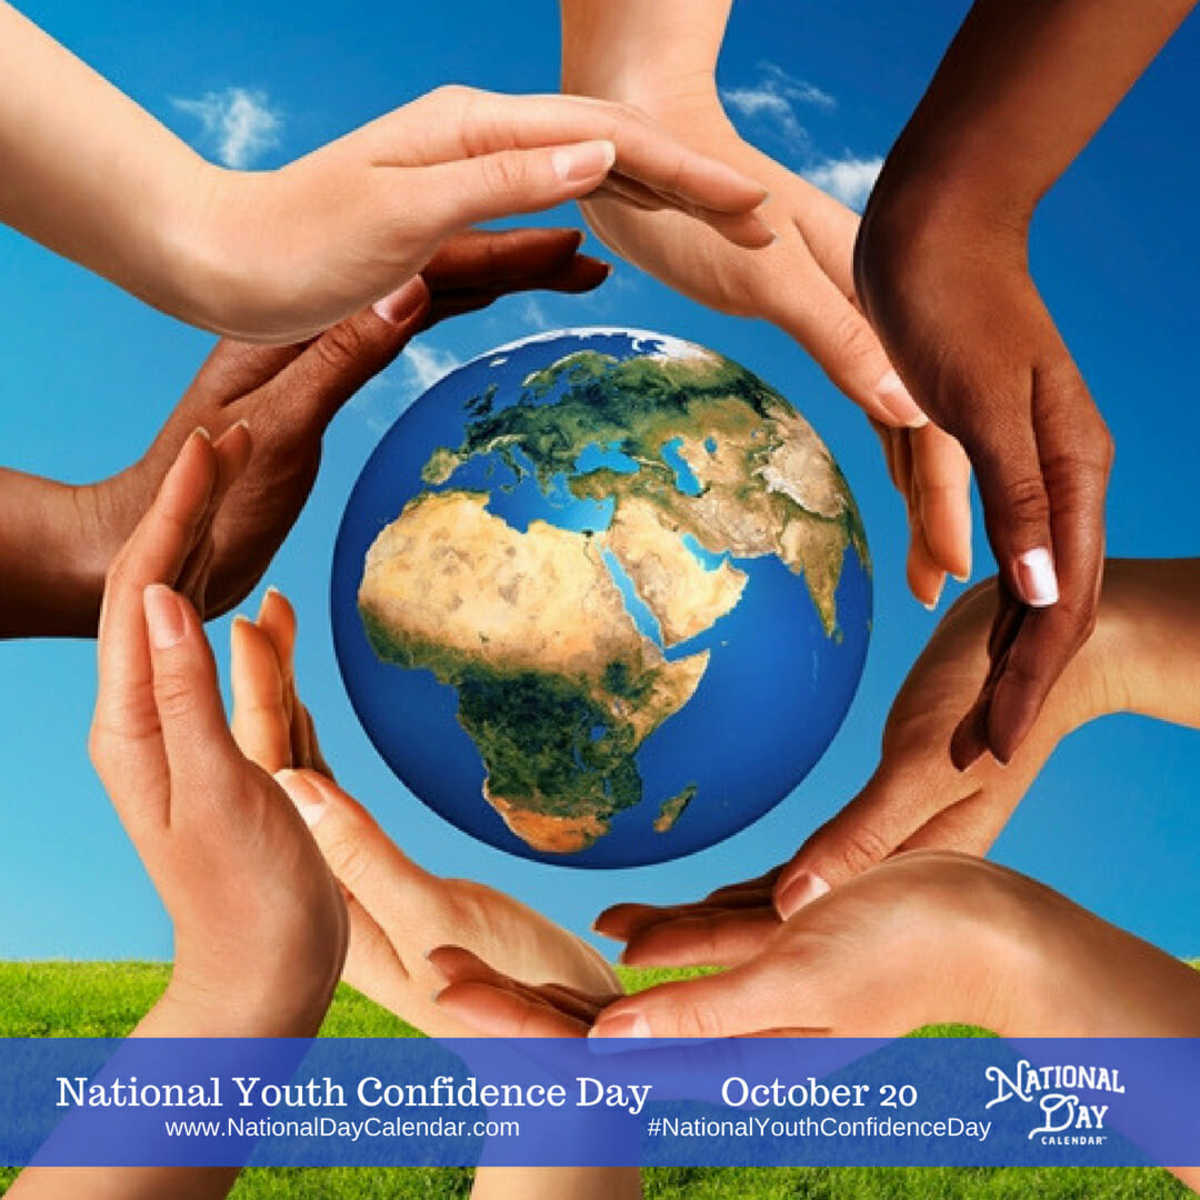 National Youth Confidence Day - October 20